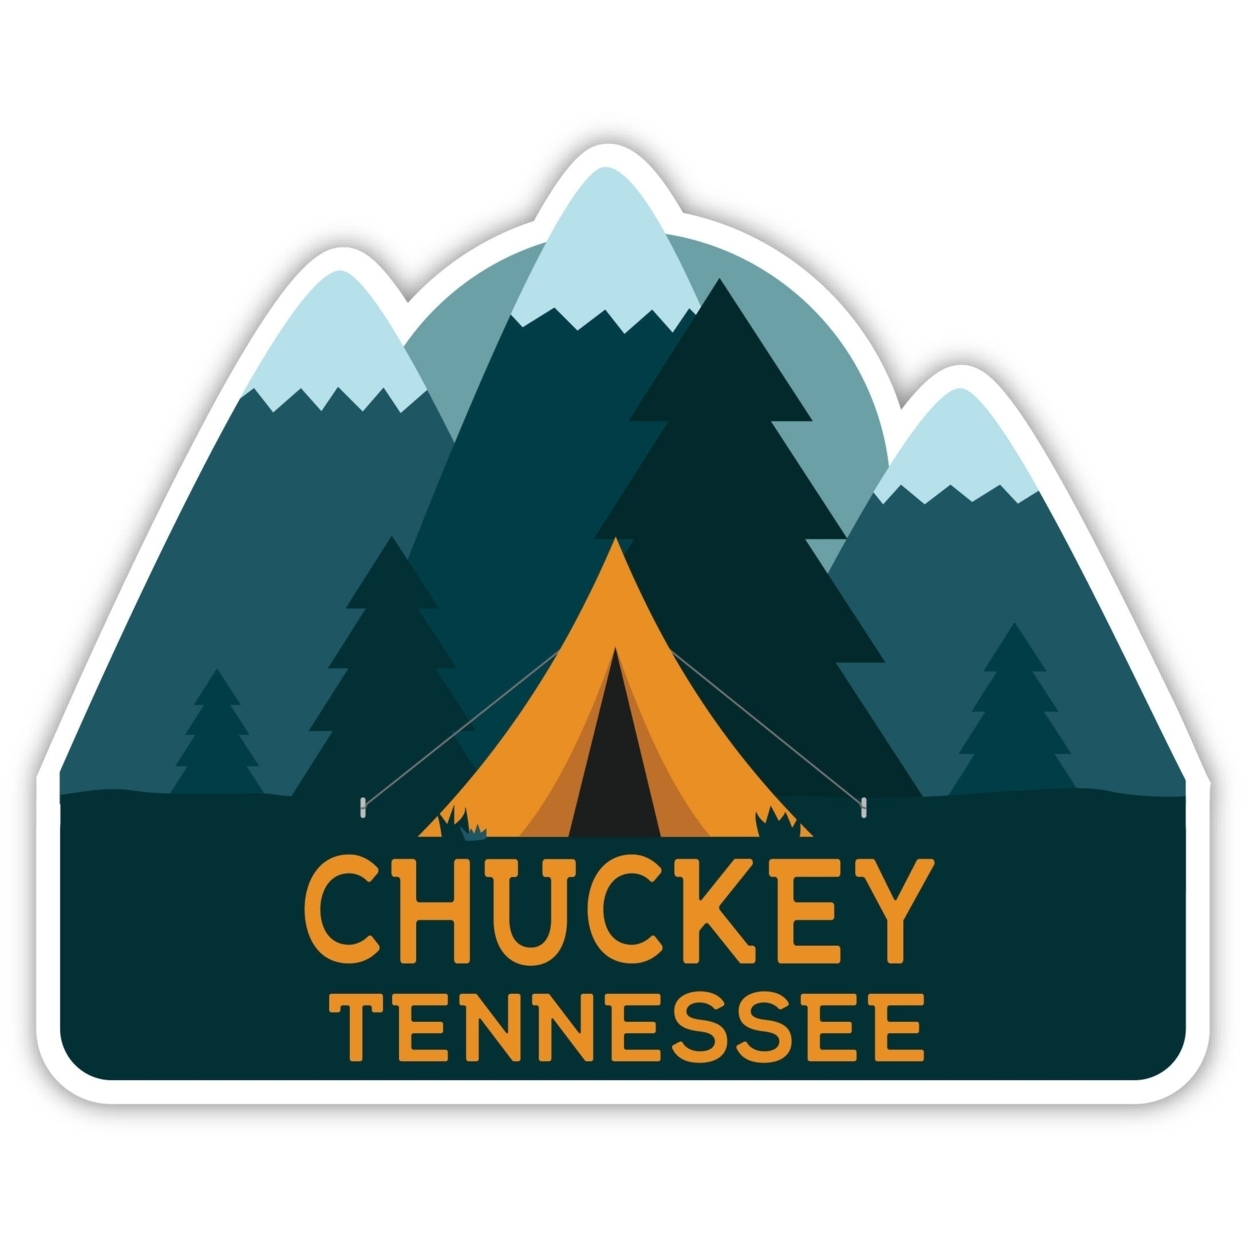 Chuckey Tennessee Souvenir Decorative Stickers (Choose Theme And Size) - Single Unit, 8-Inch, Tent